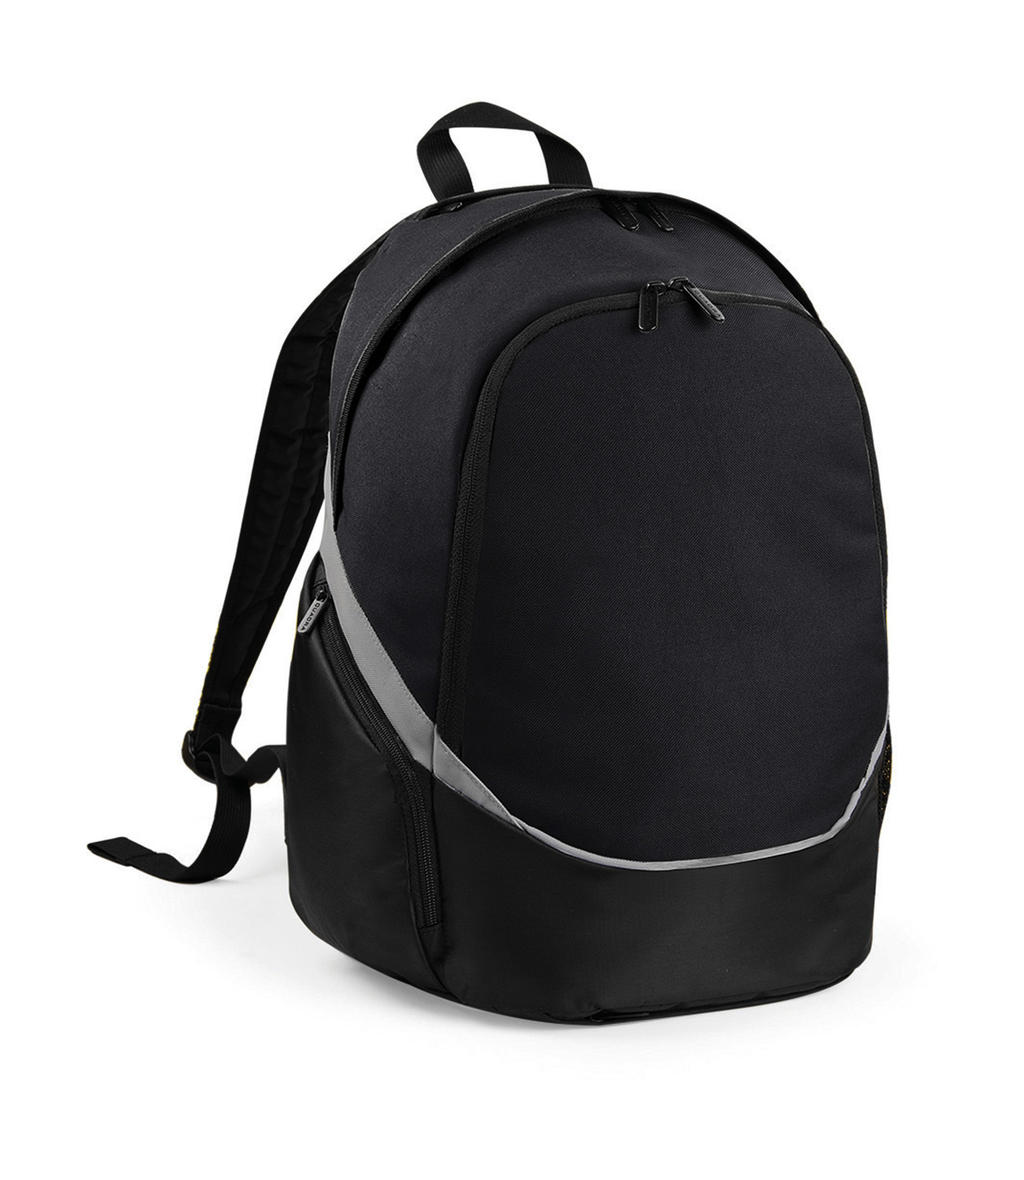  Pro Team Backpack in Farbe Black/Grey